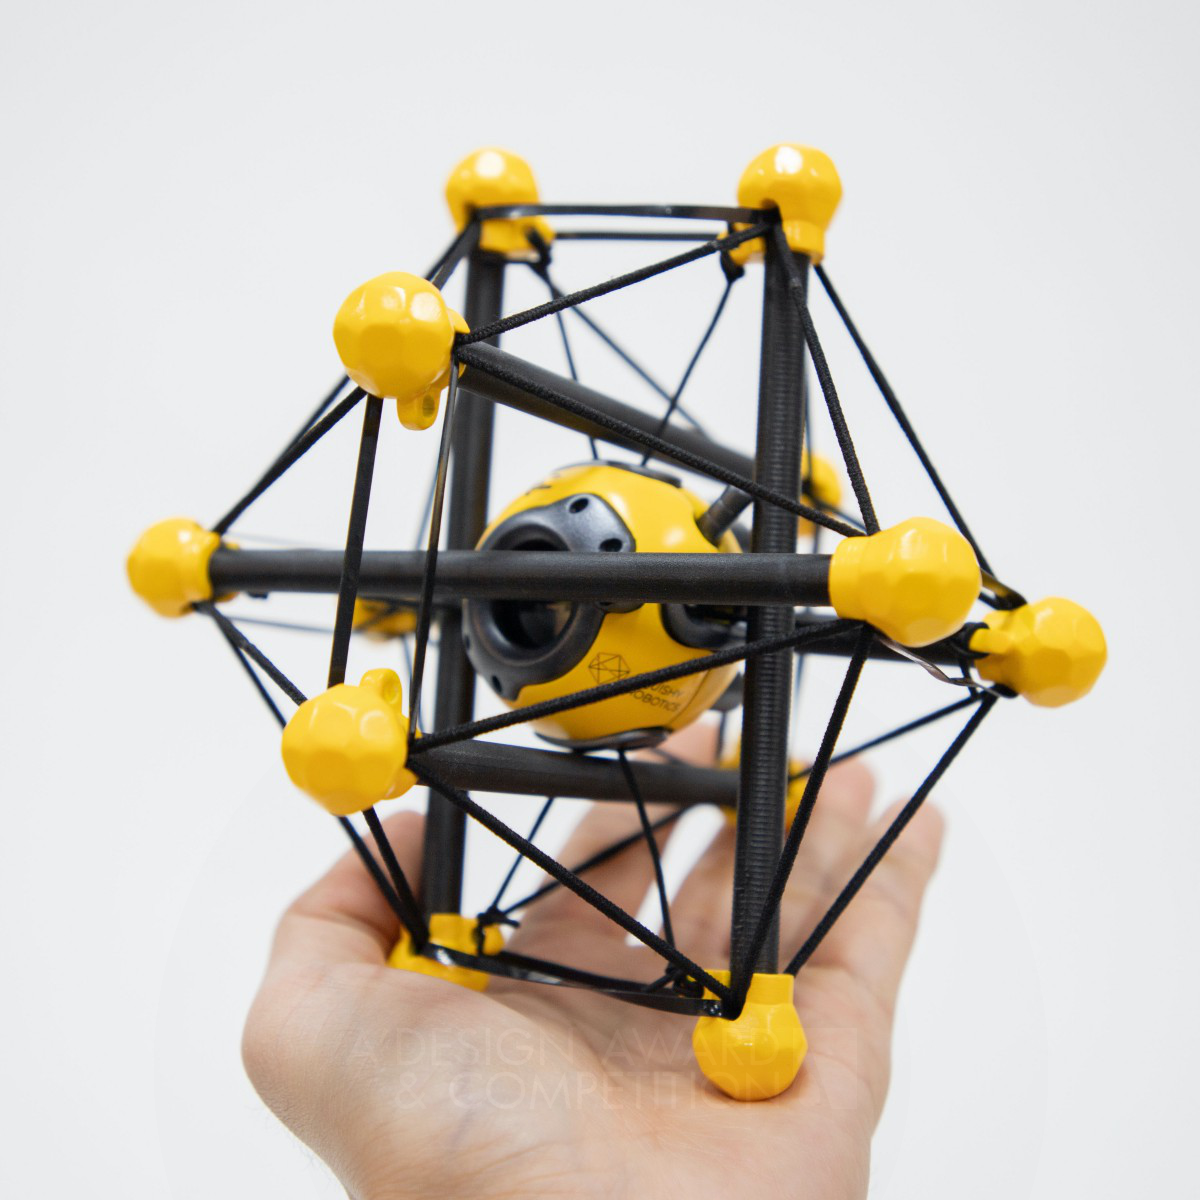 Tensegrity Deployable Sensor for Disaster Area by Daniel Lim